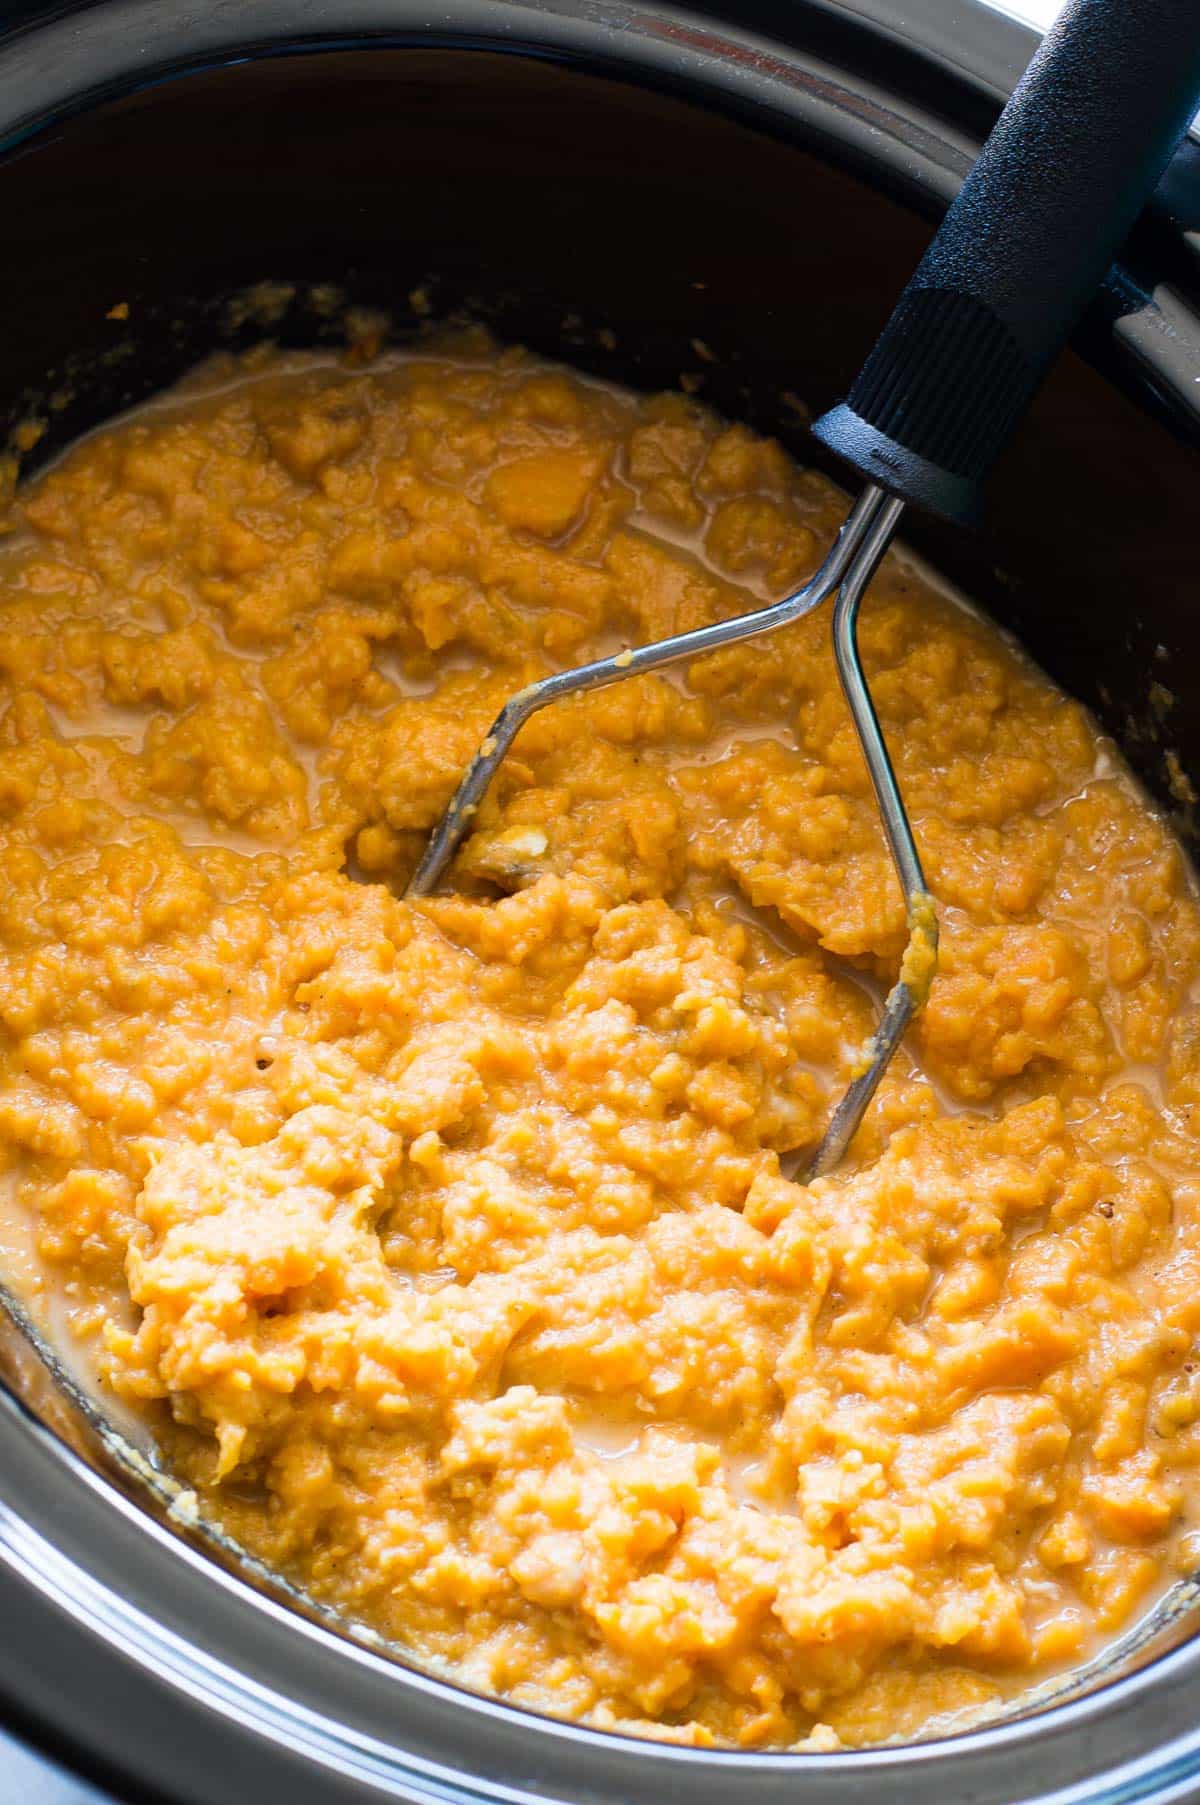 All ingredients mashed together for a sweet potato casserole.